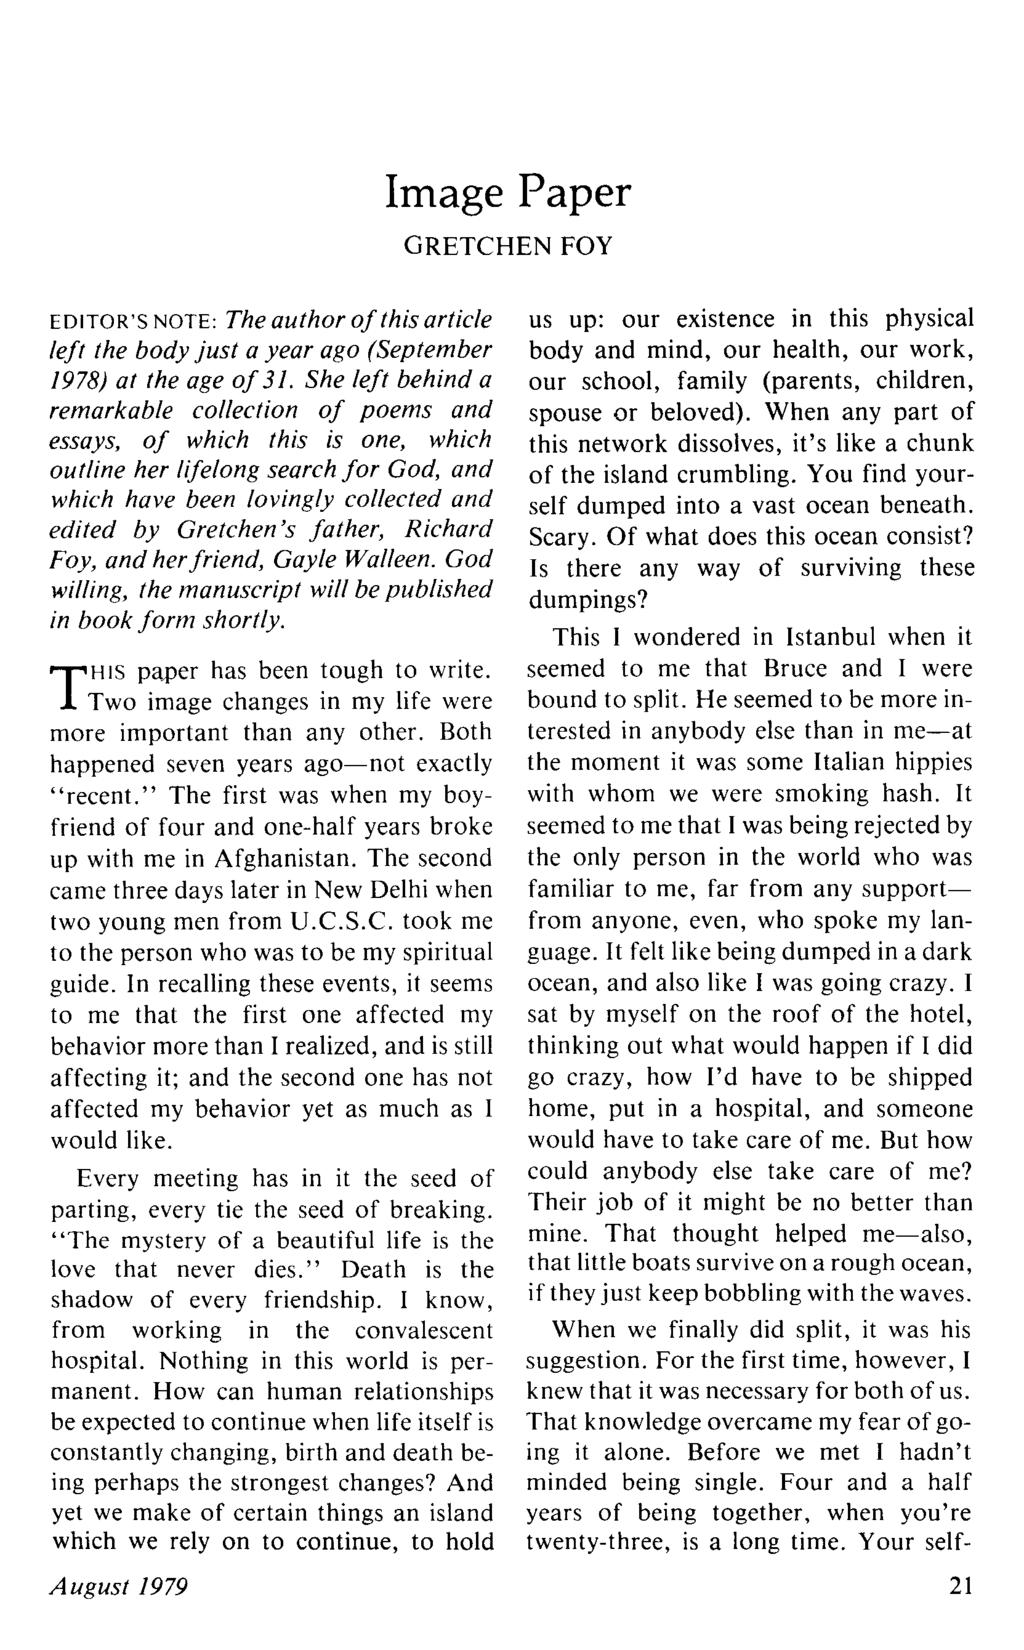 Image Paper GRETCHEN FOY EDITOR'S NOTE: The author of this article left the body just a year ago (September 1978) at the age of 31.